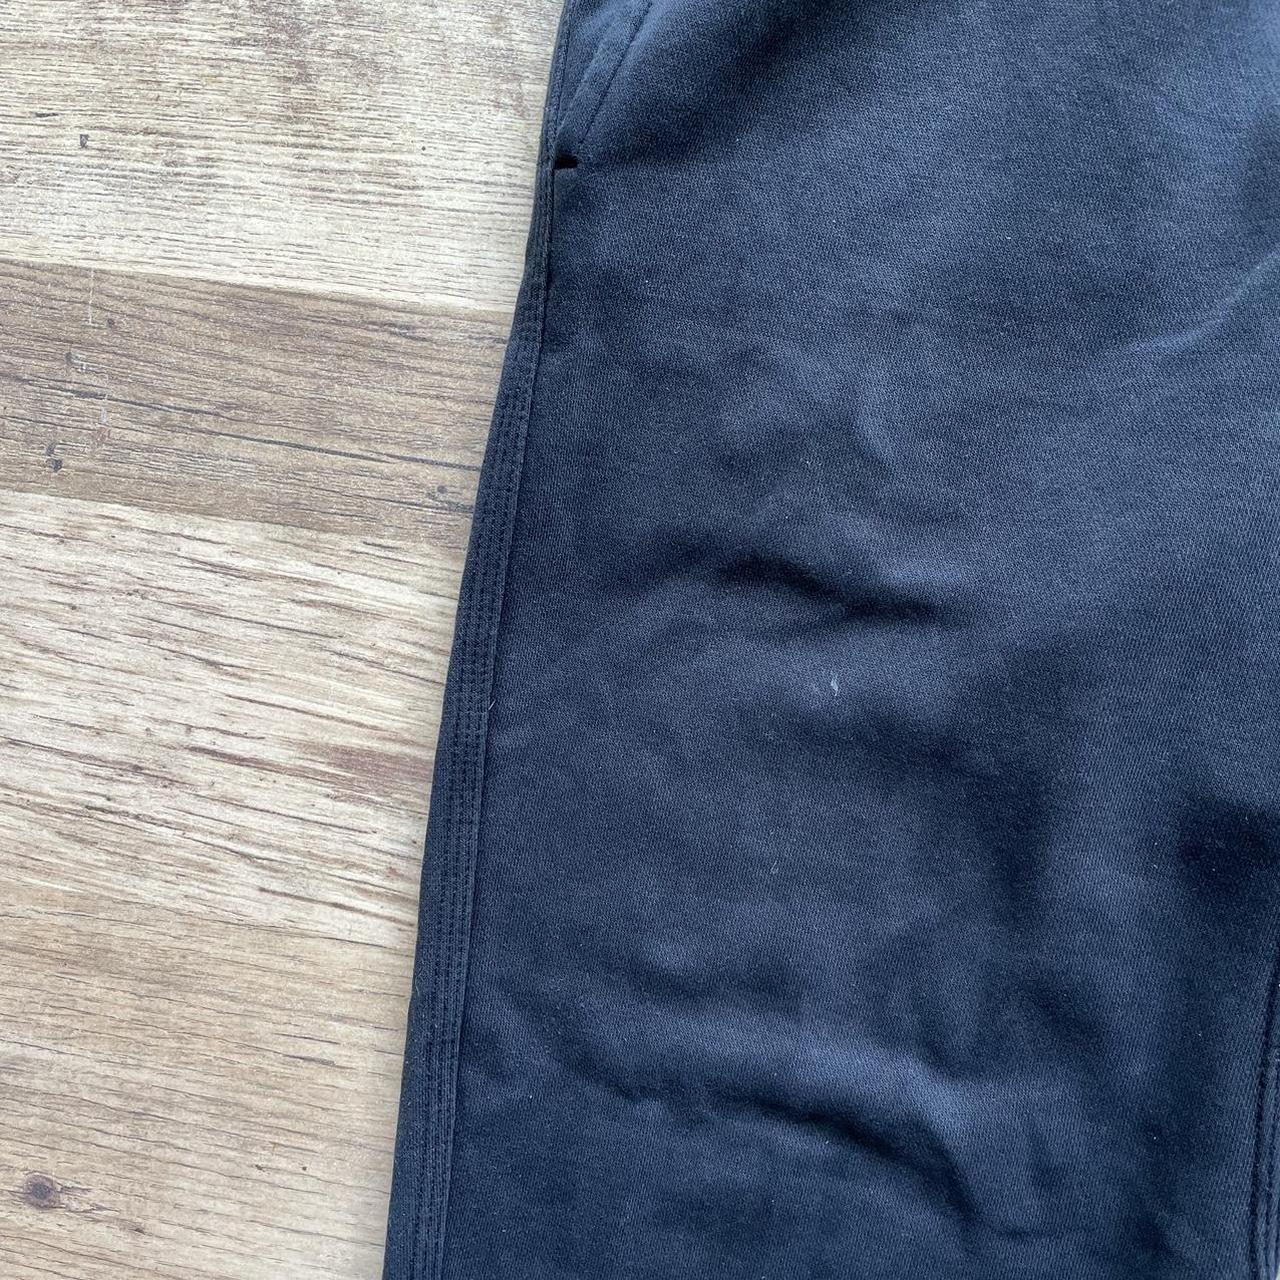 Nike Baggy Fit Club Joggers in Black Size... - Depop